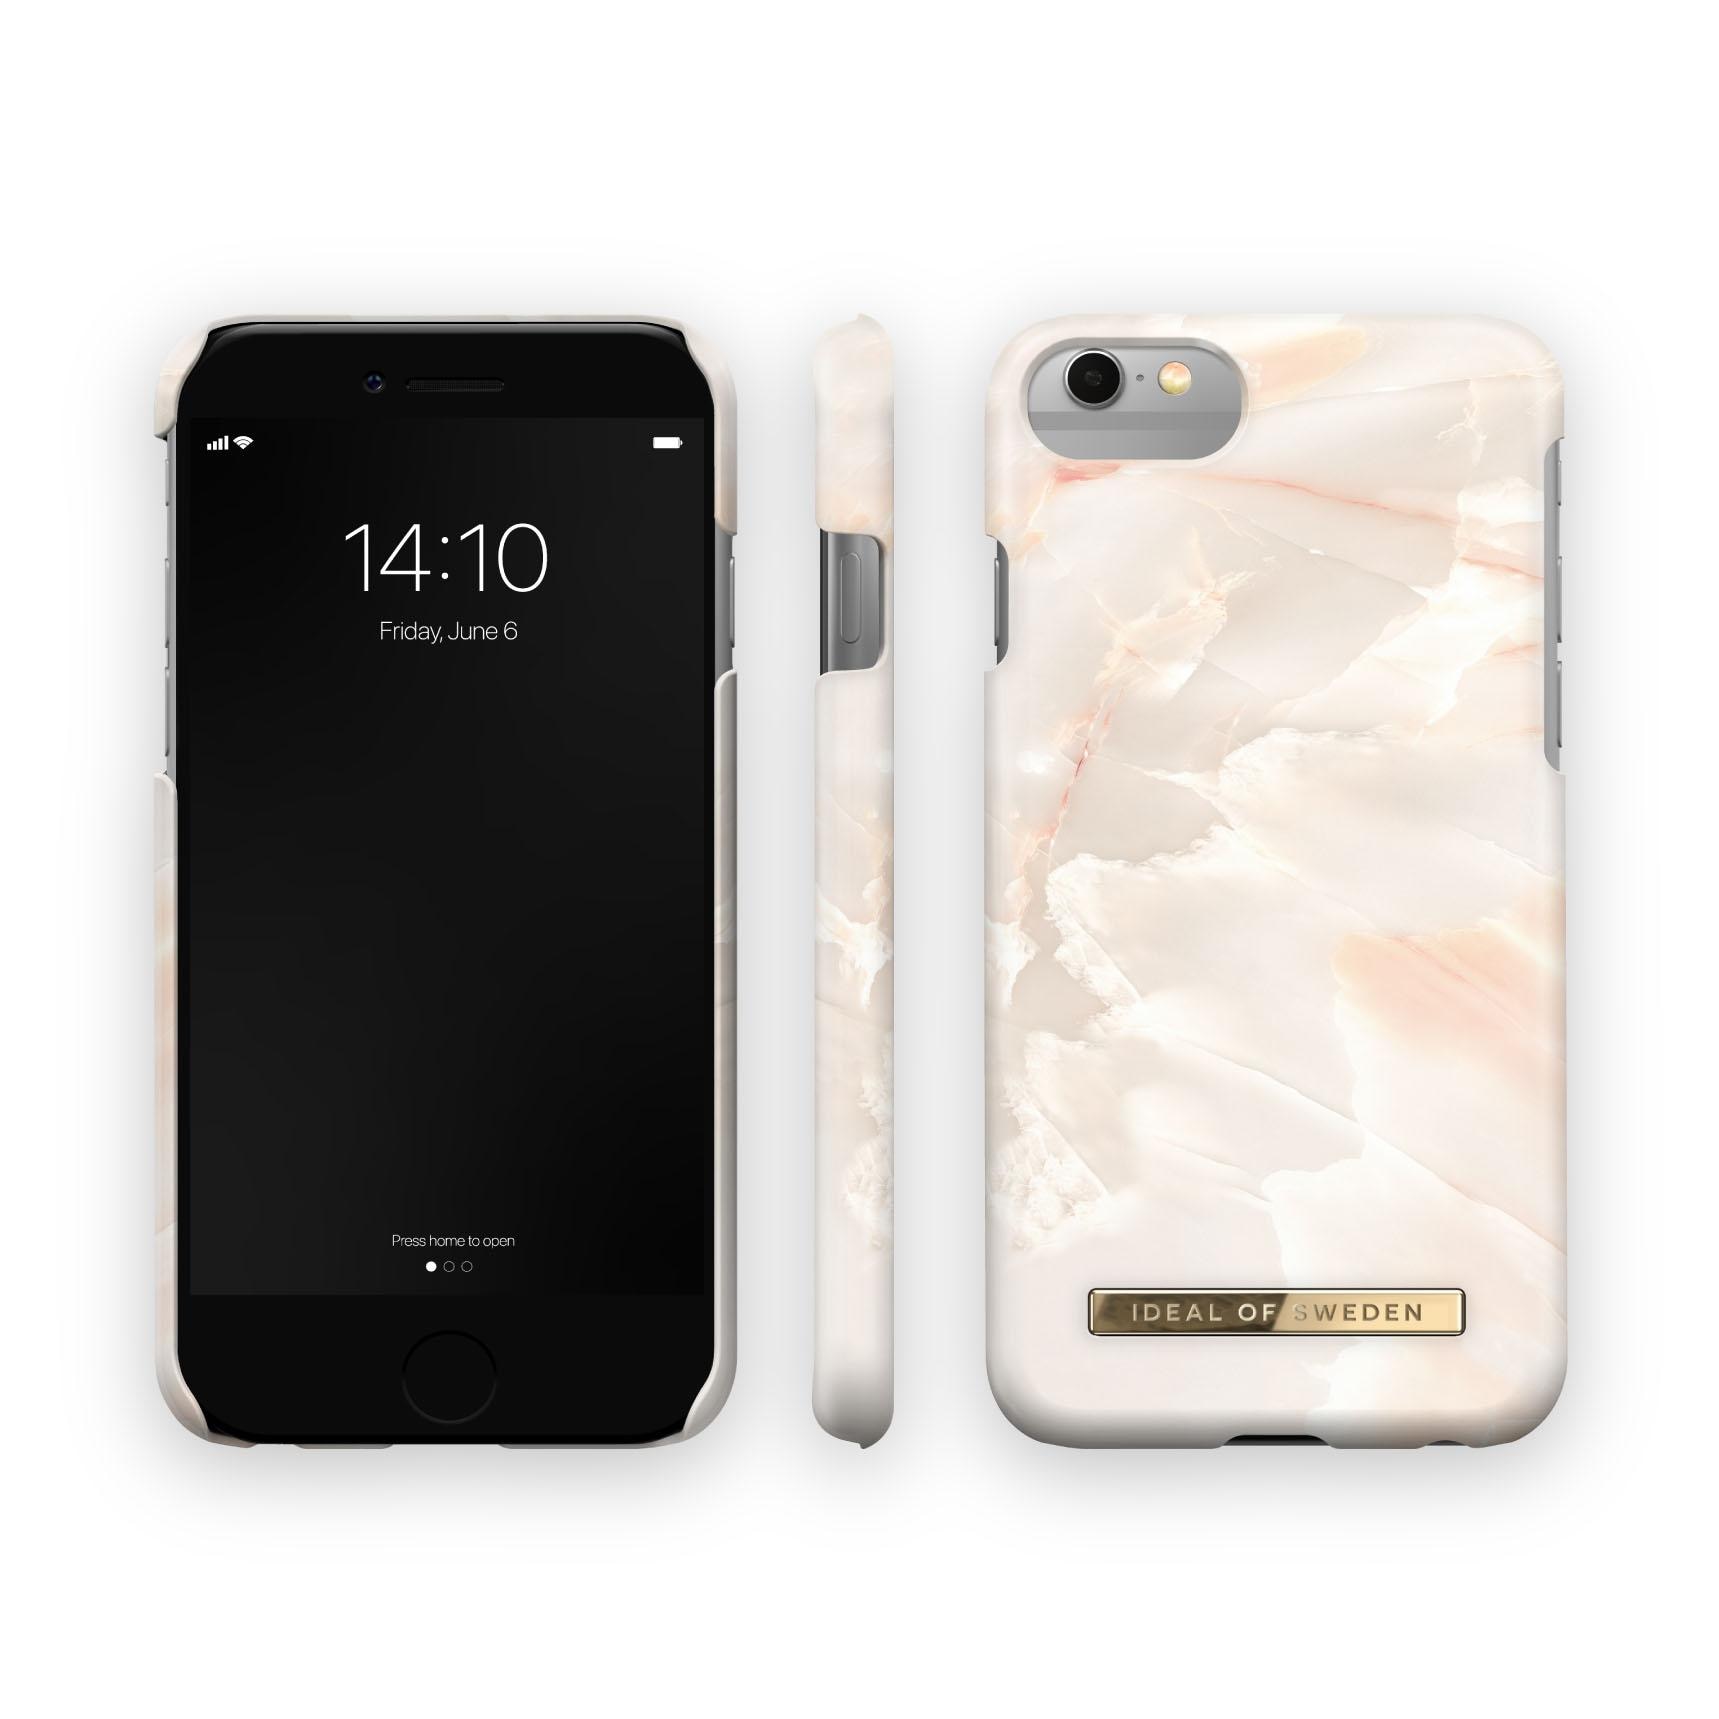 Fashion Case iPhone 6/6S/7/8/SE 2020 Rose Pearl Marble